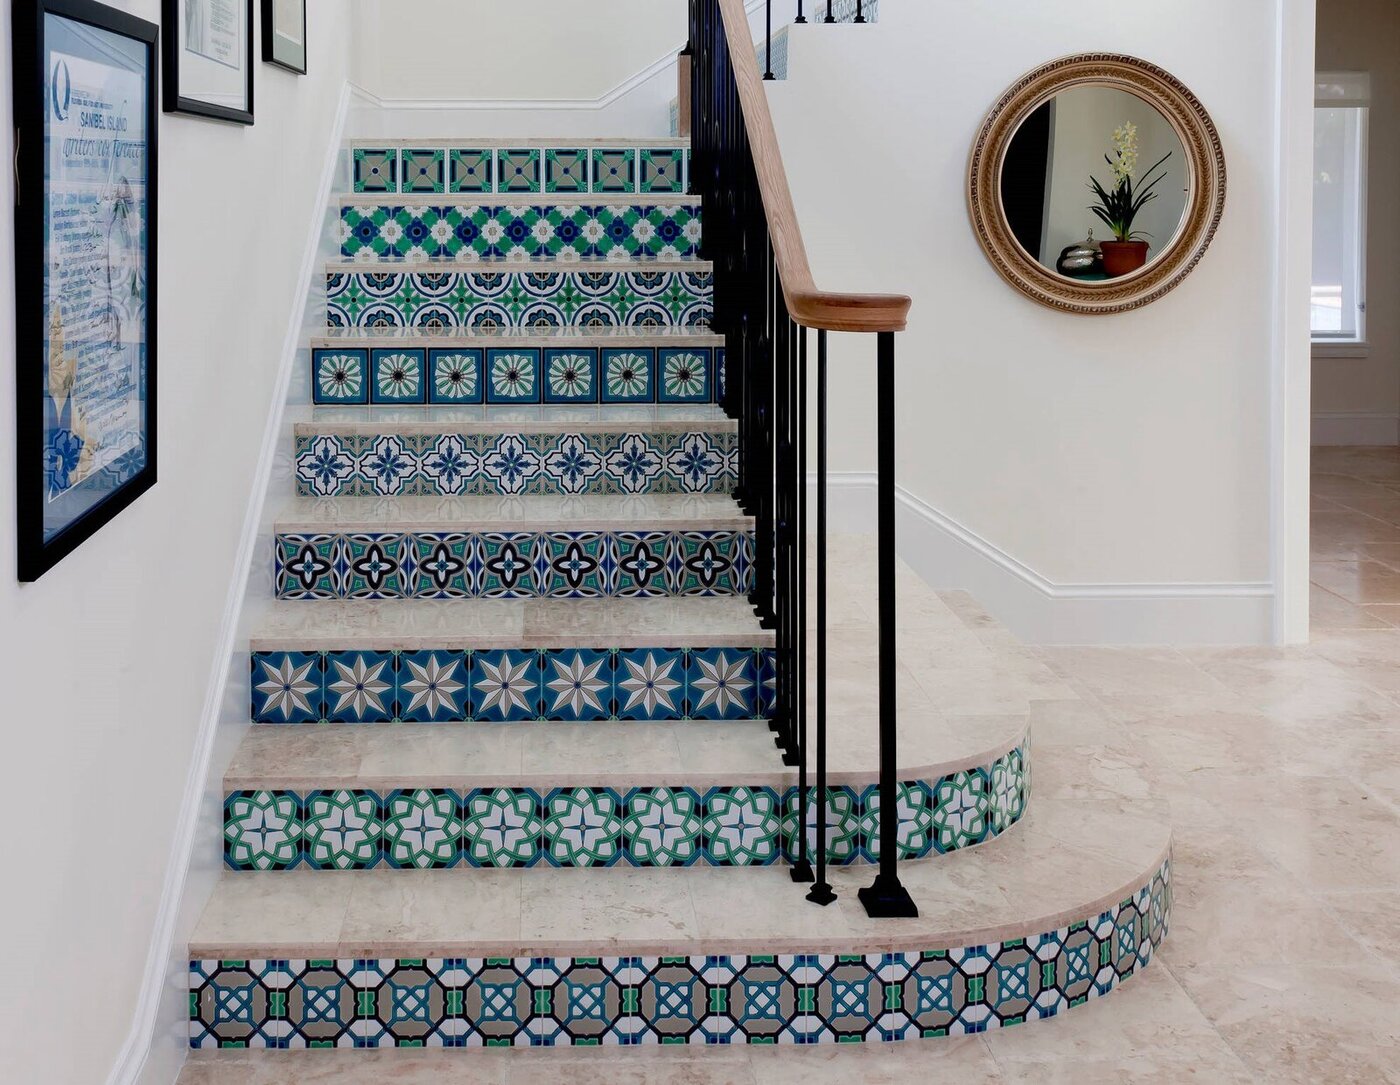 How To Tile Stairs: Hints And Tips From The Experts